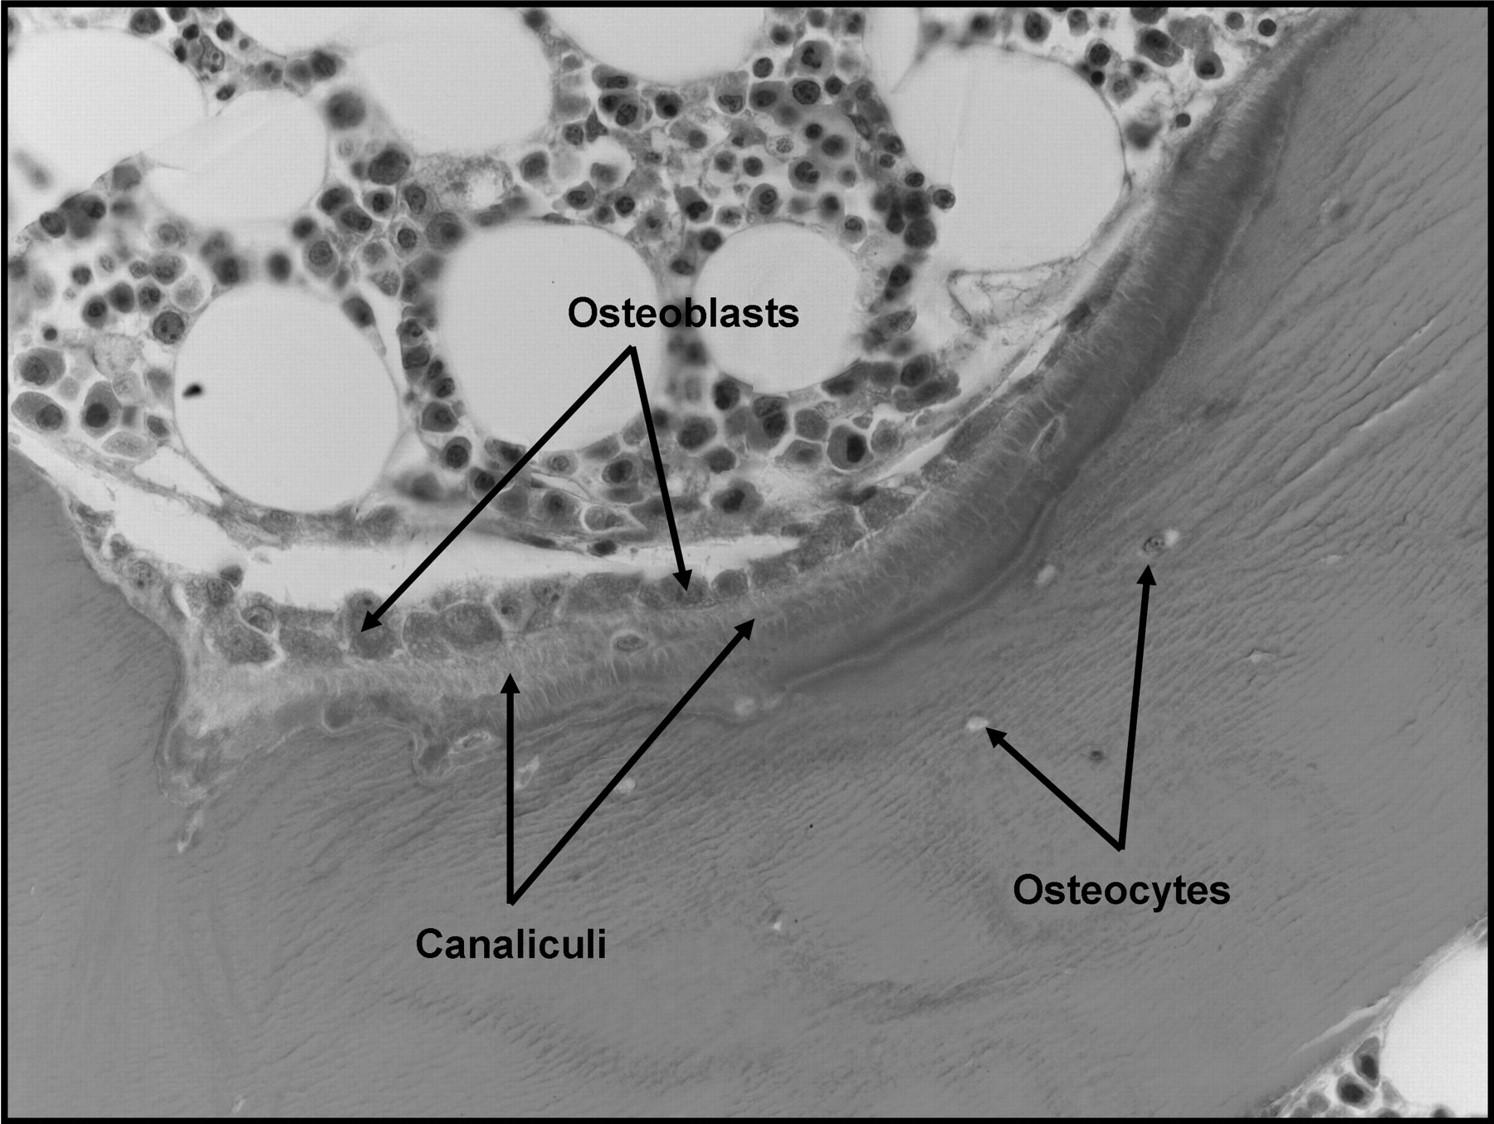 Osteoblasts synthesize proteinaceous matrix, composed mostly of type I collagen, to fill